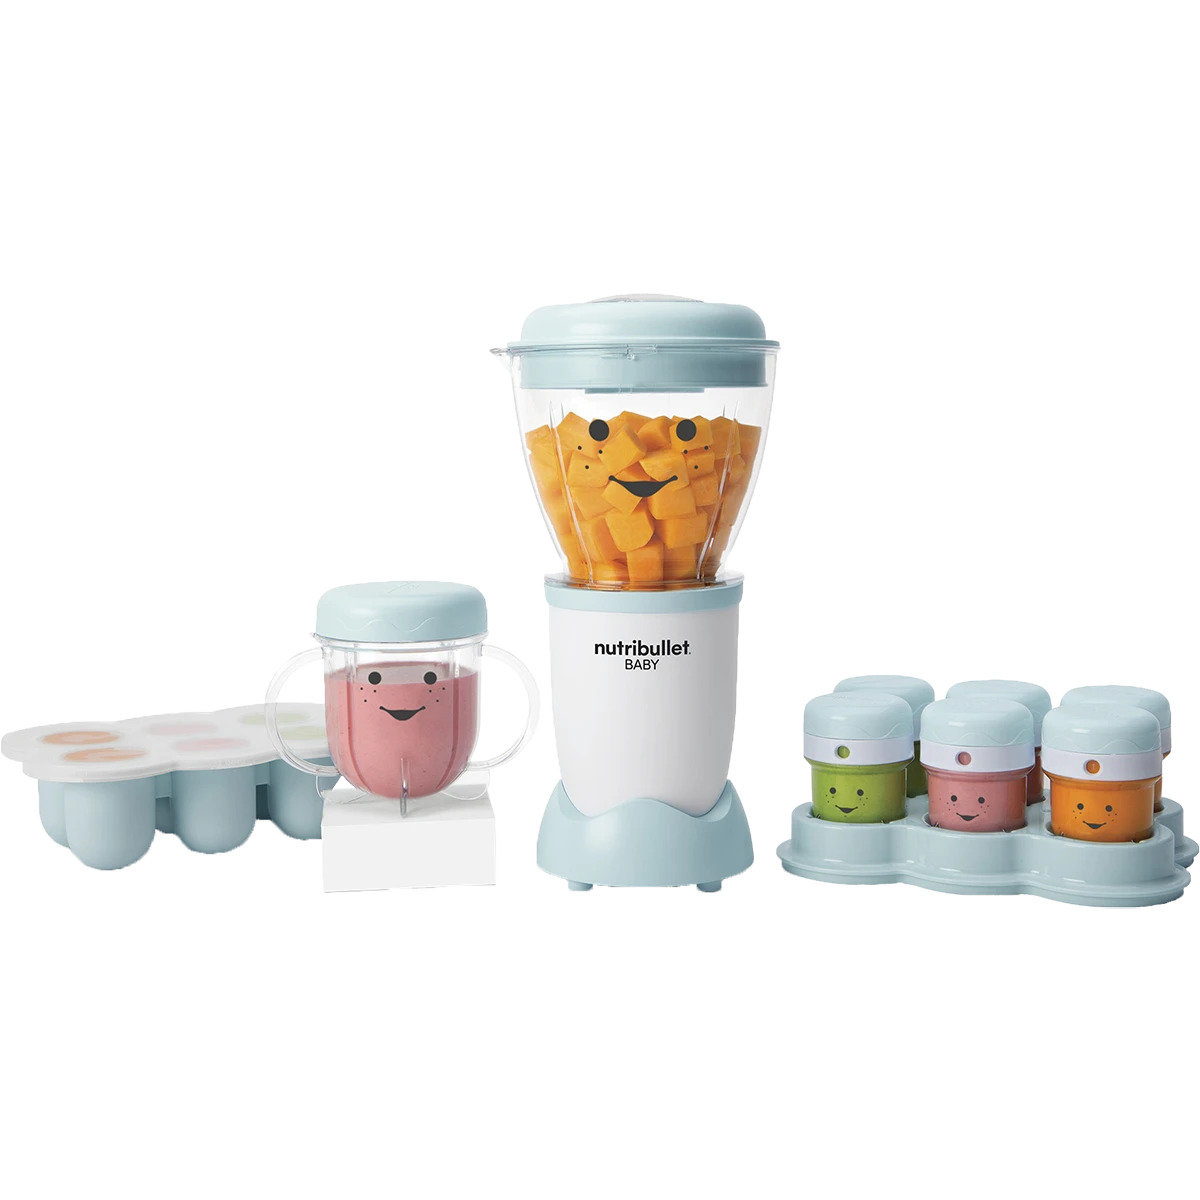 Magic Bullet Baby Care Blender & Set of Containers